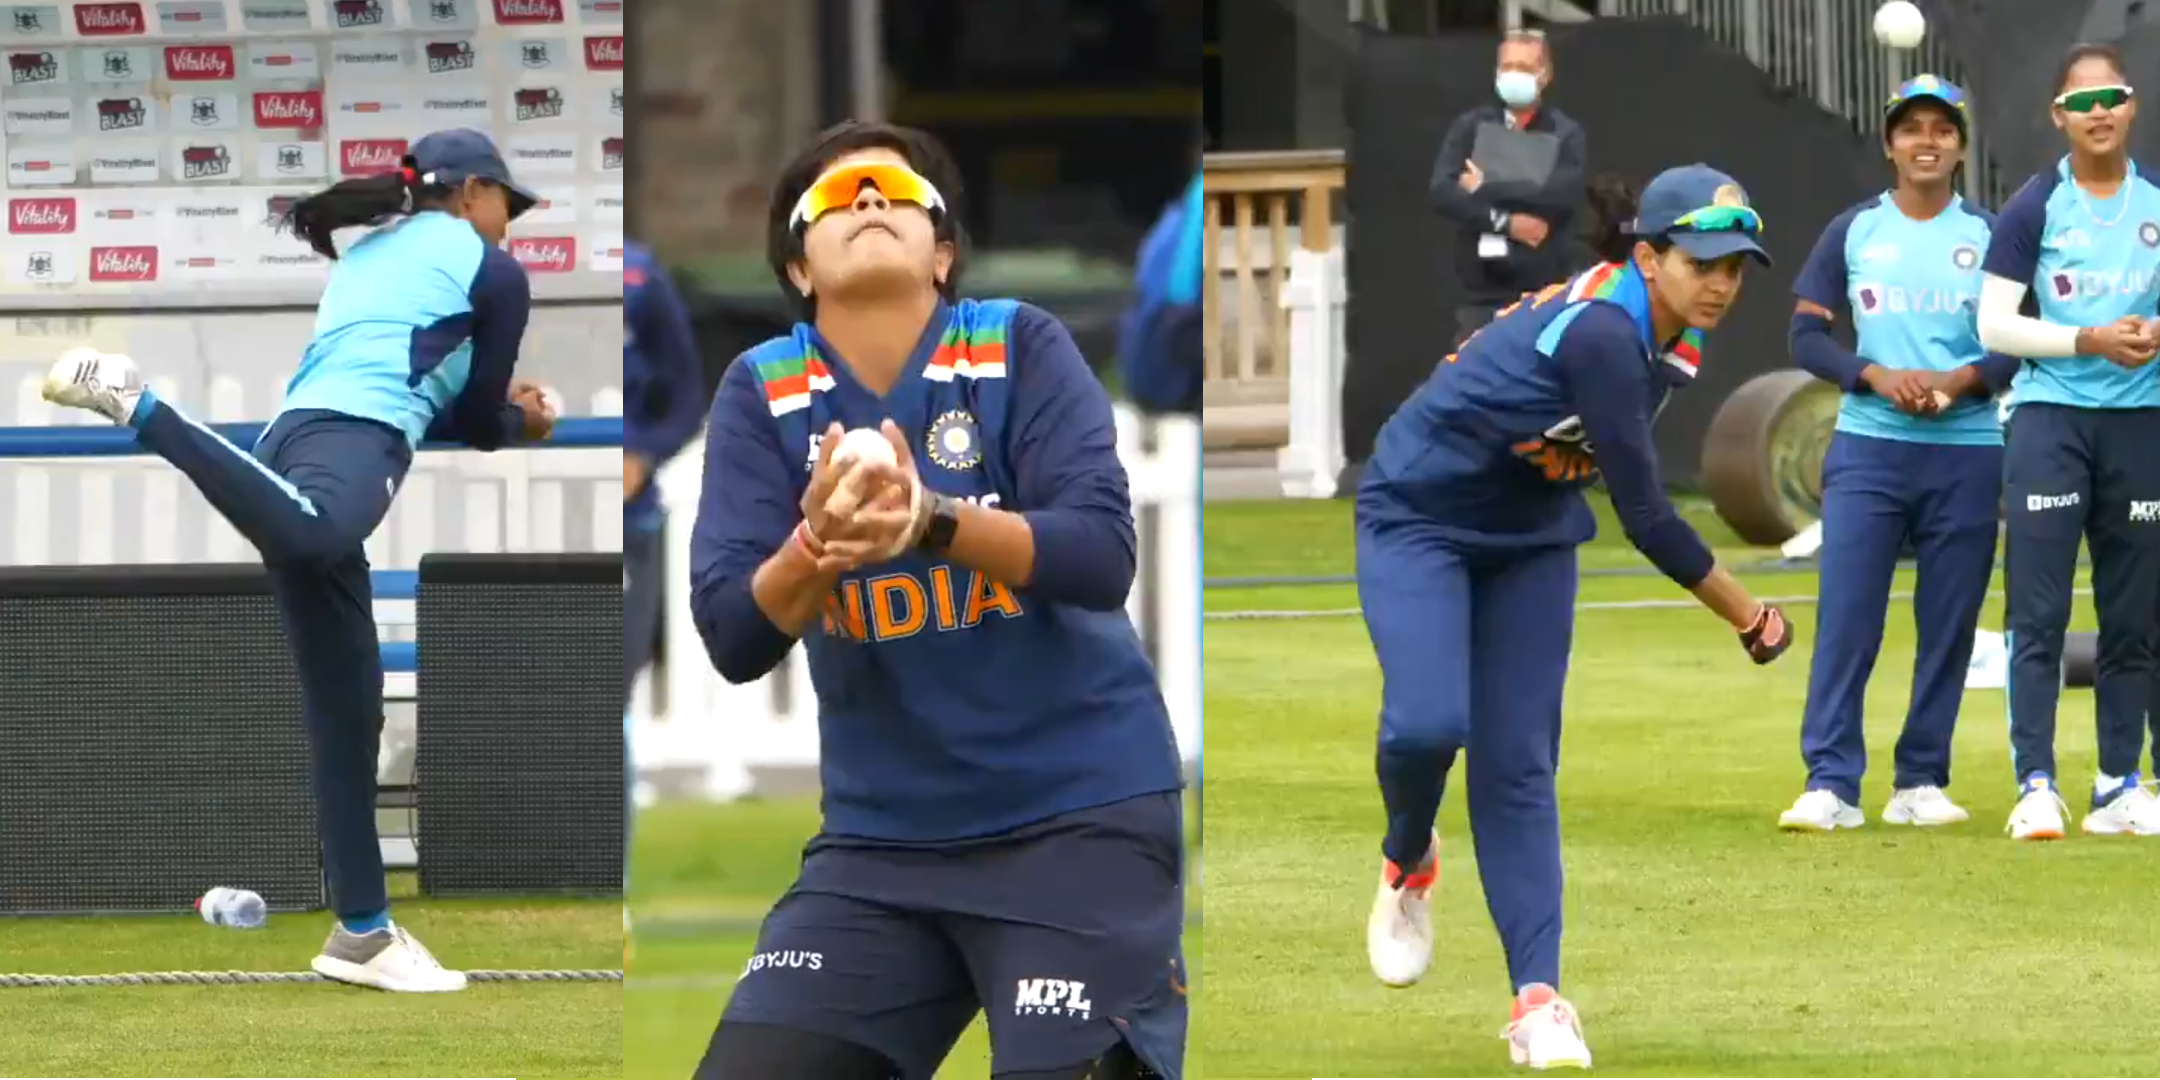 Watch: India’s Fun Practice Session Ahead Of The First ODI Against England